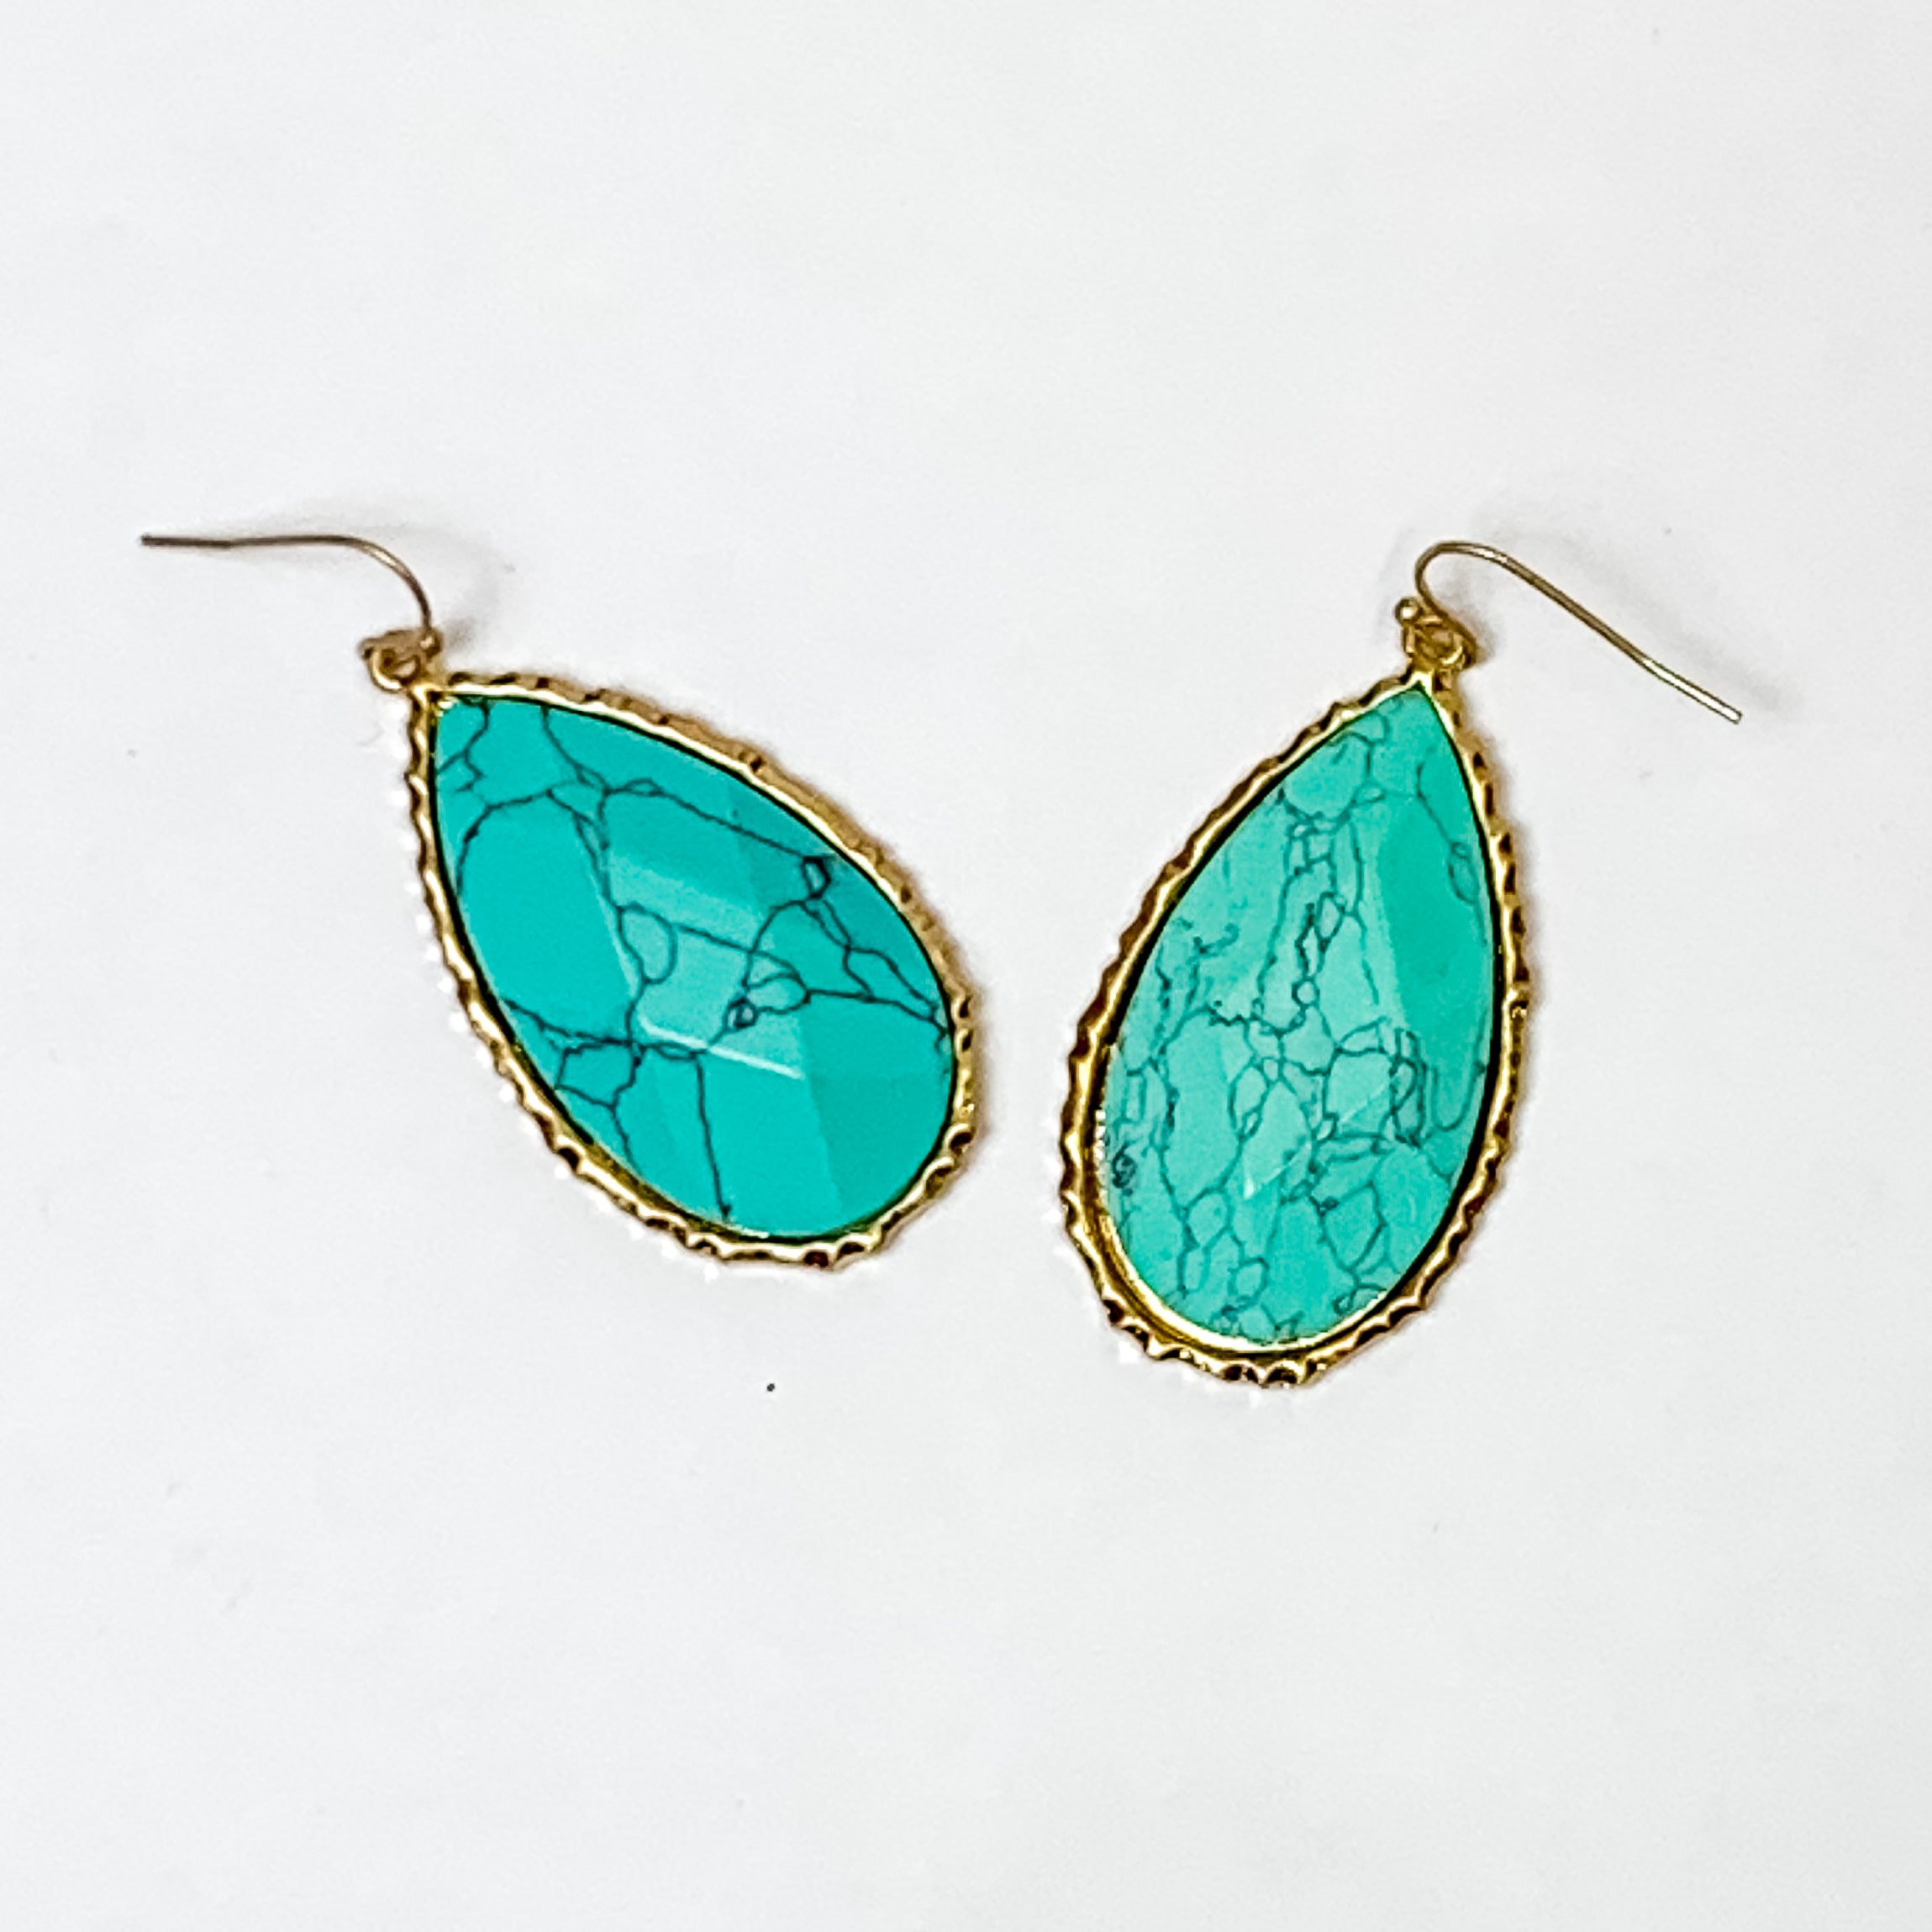 Gold Tone Teardrop Faux Stone Earrings in Turquoise - Giddy Up Glamour Boutique